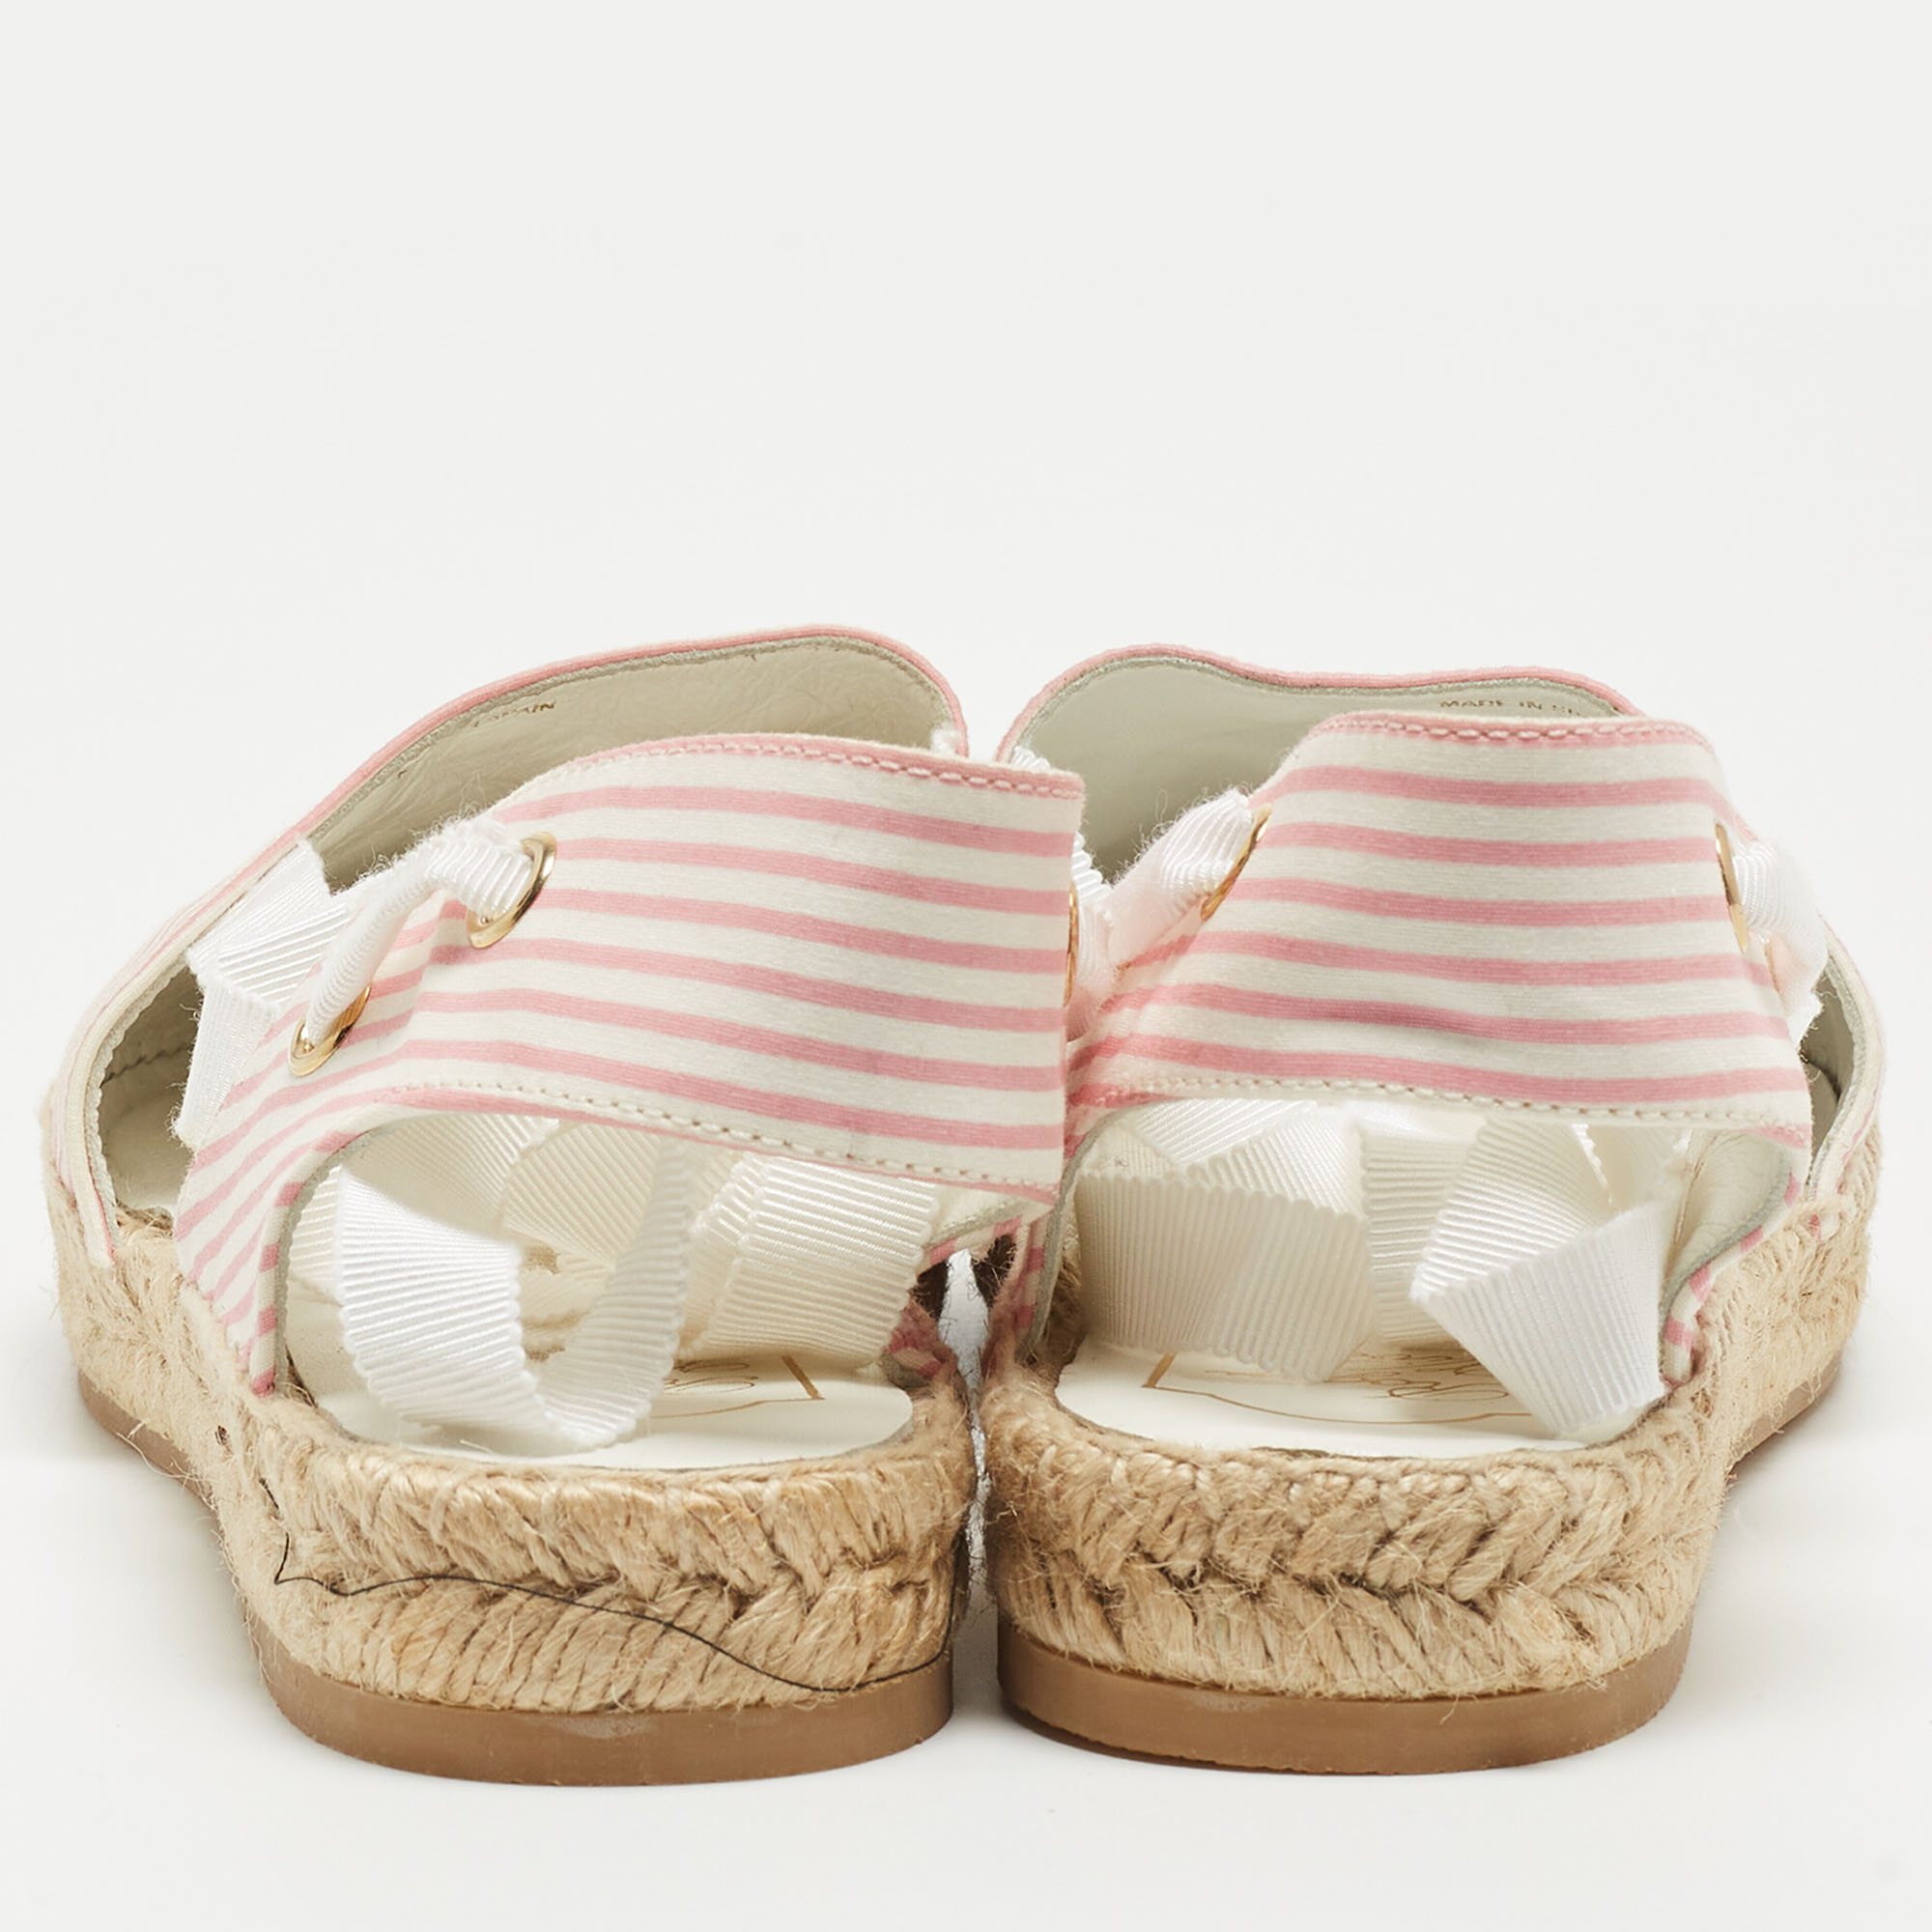 Roger Vivier Pink/White Striped Fabric Floral Embroidered Ankle Tie Espadrille Flats Size 40